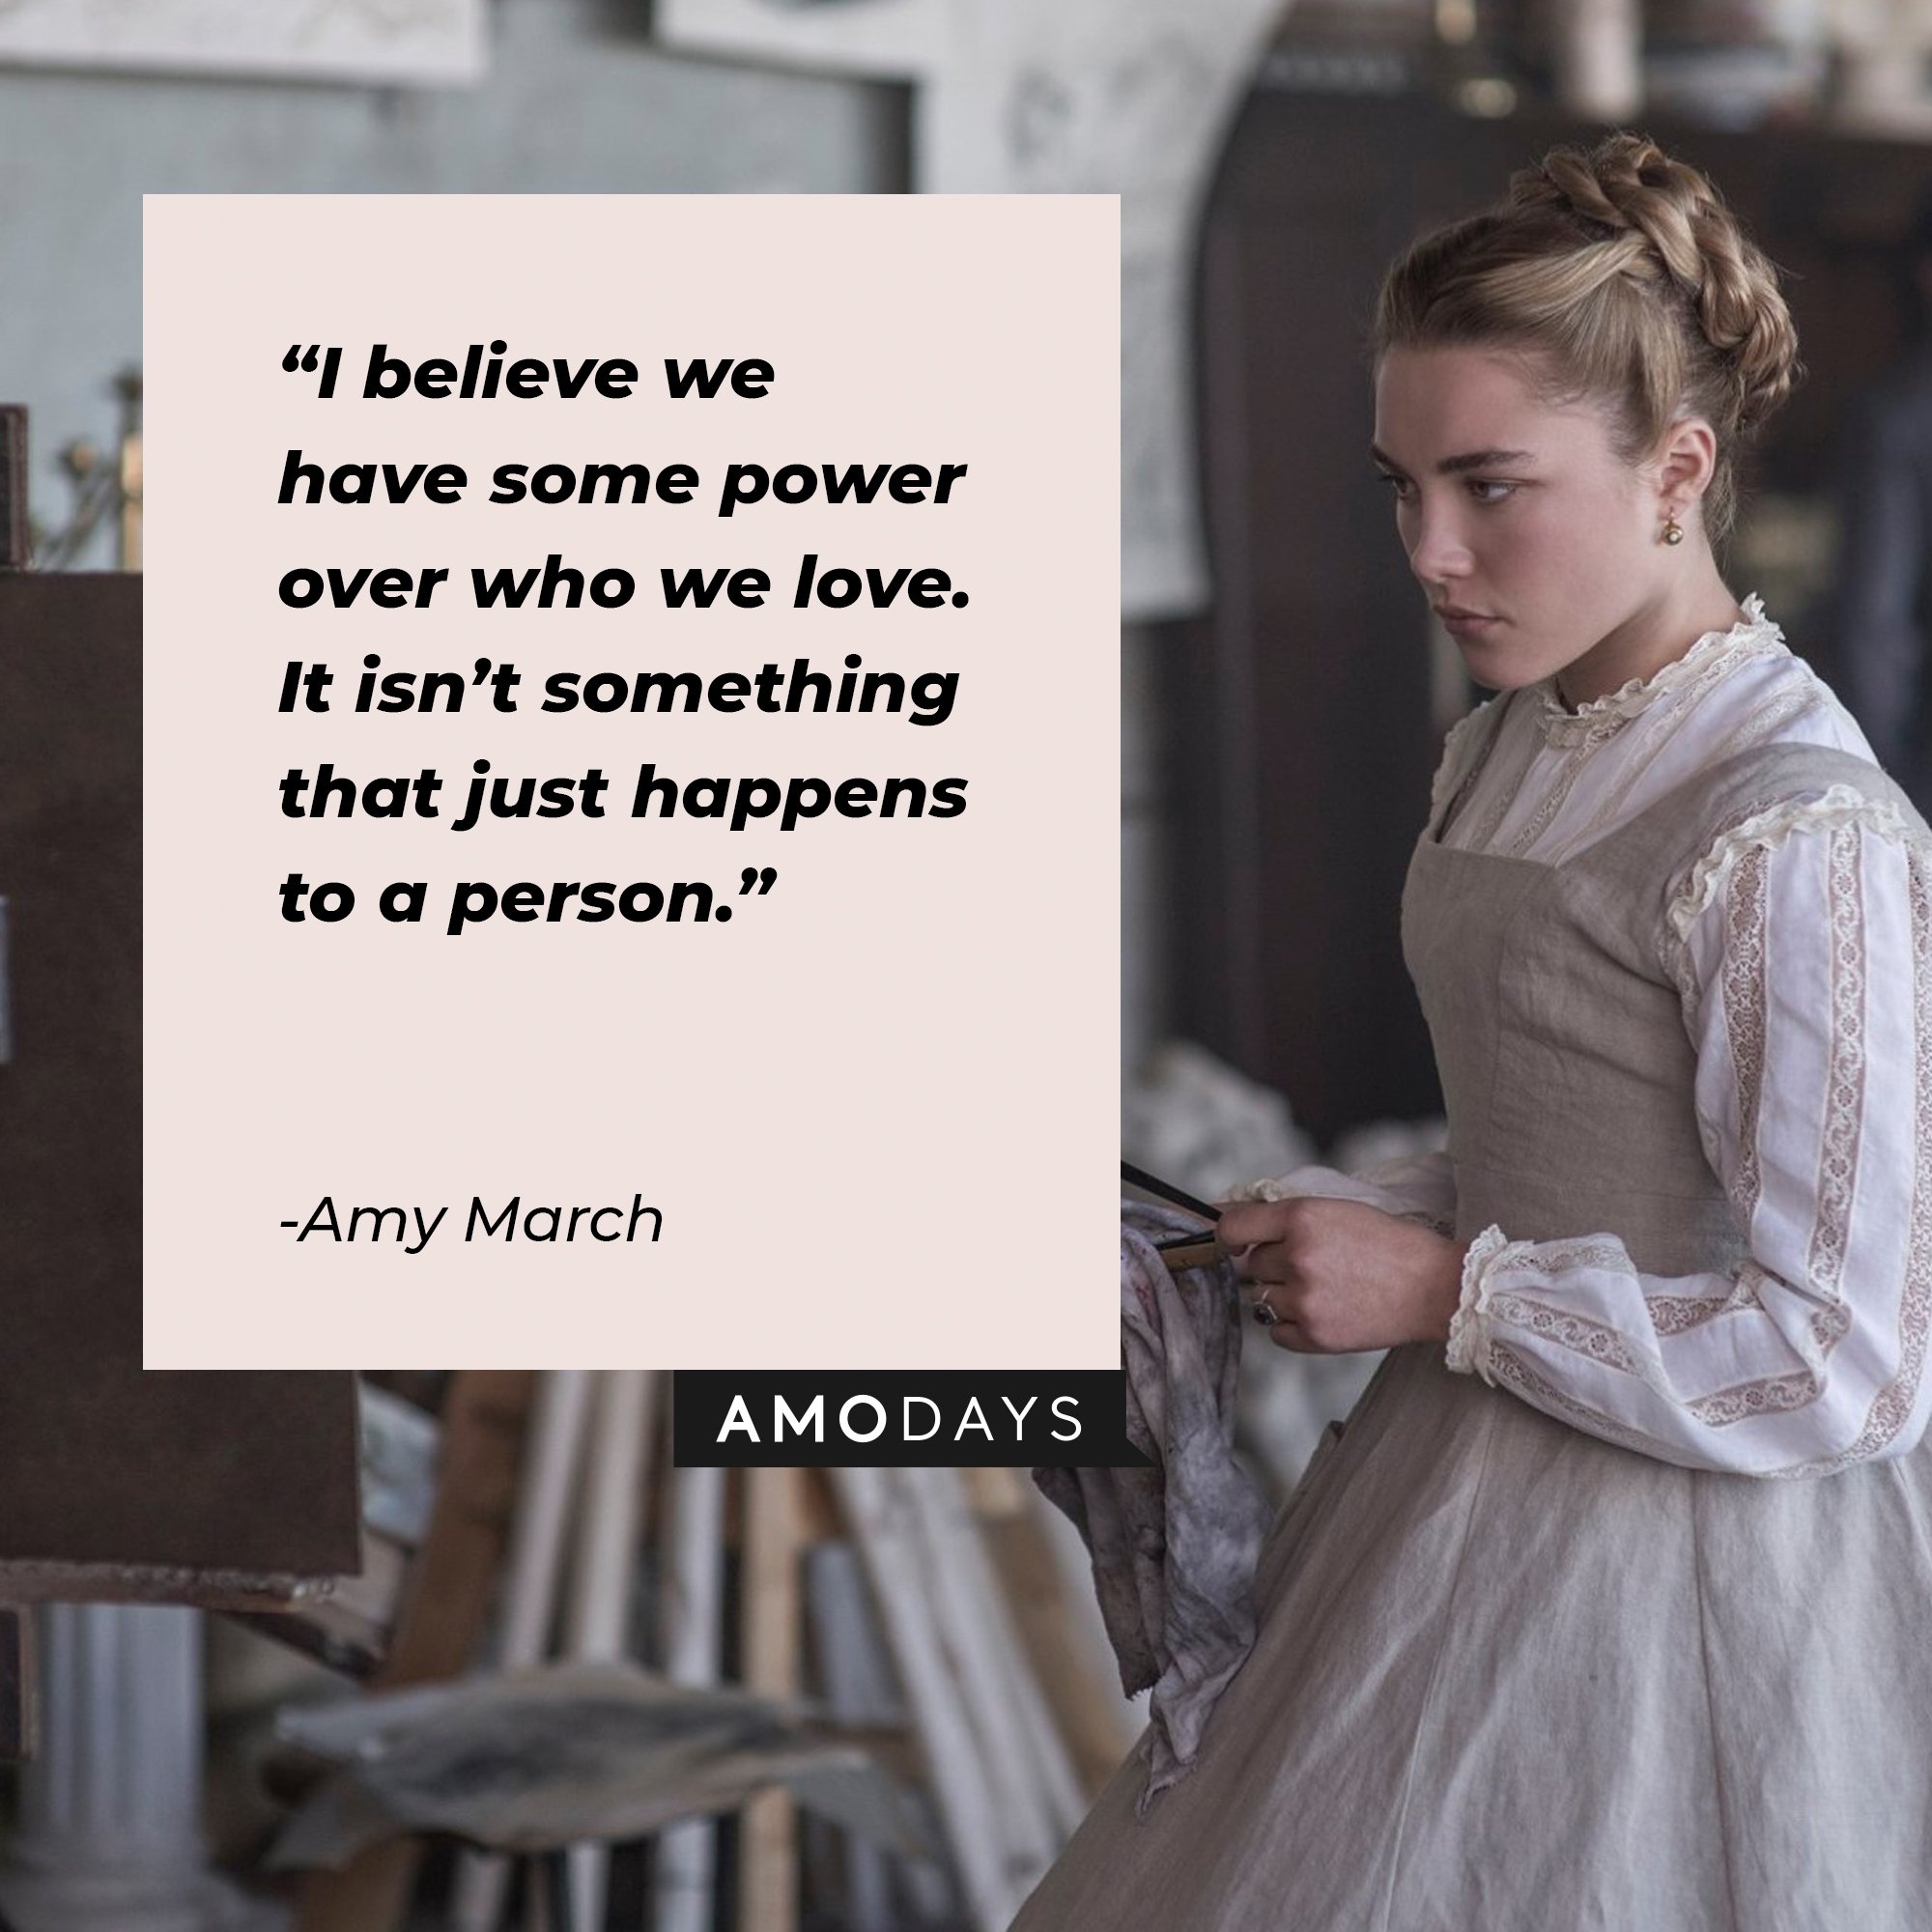 Amy March’s quote: “I believe we have some power over who we love. It isn’t something that just happens to a person.”  | Image: AmoDays